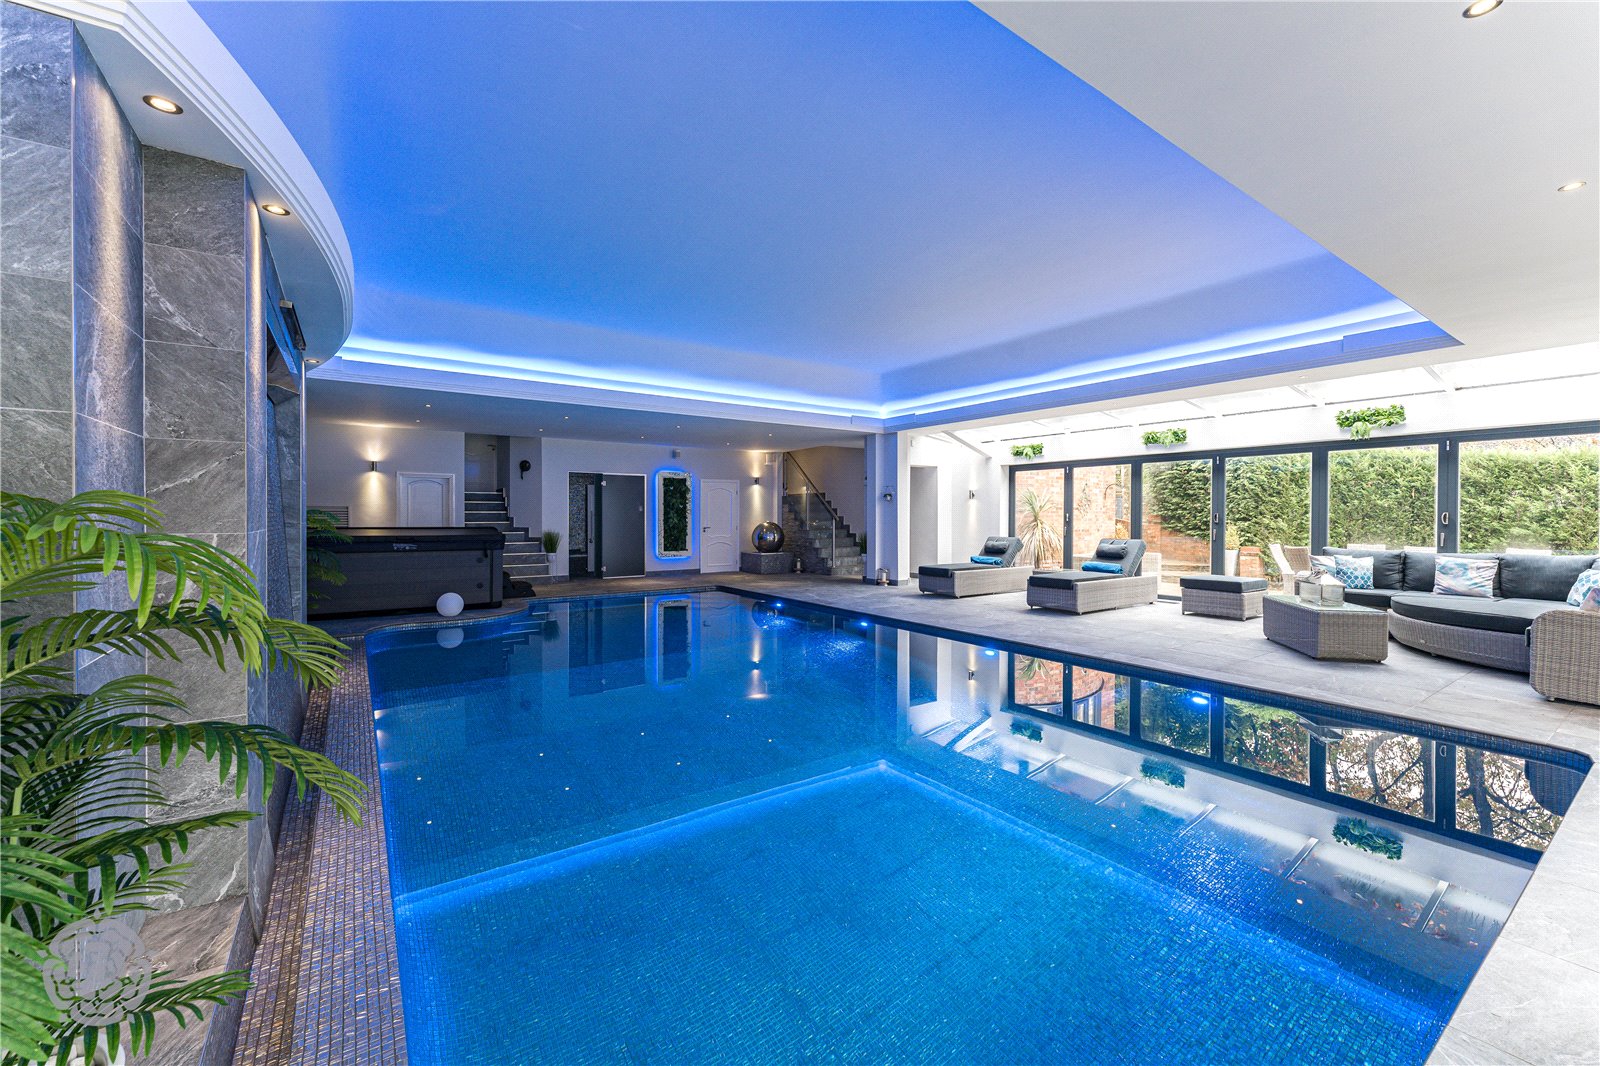 The spa-level swimming pool in the Bolton mansion